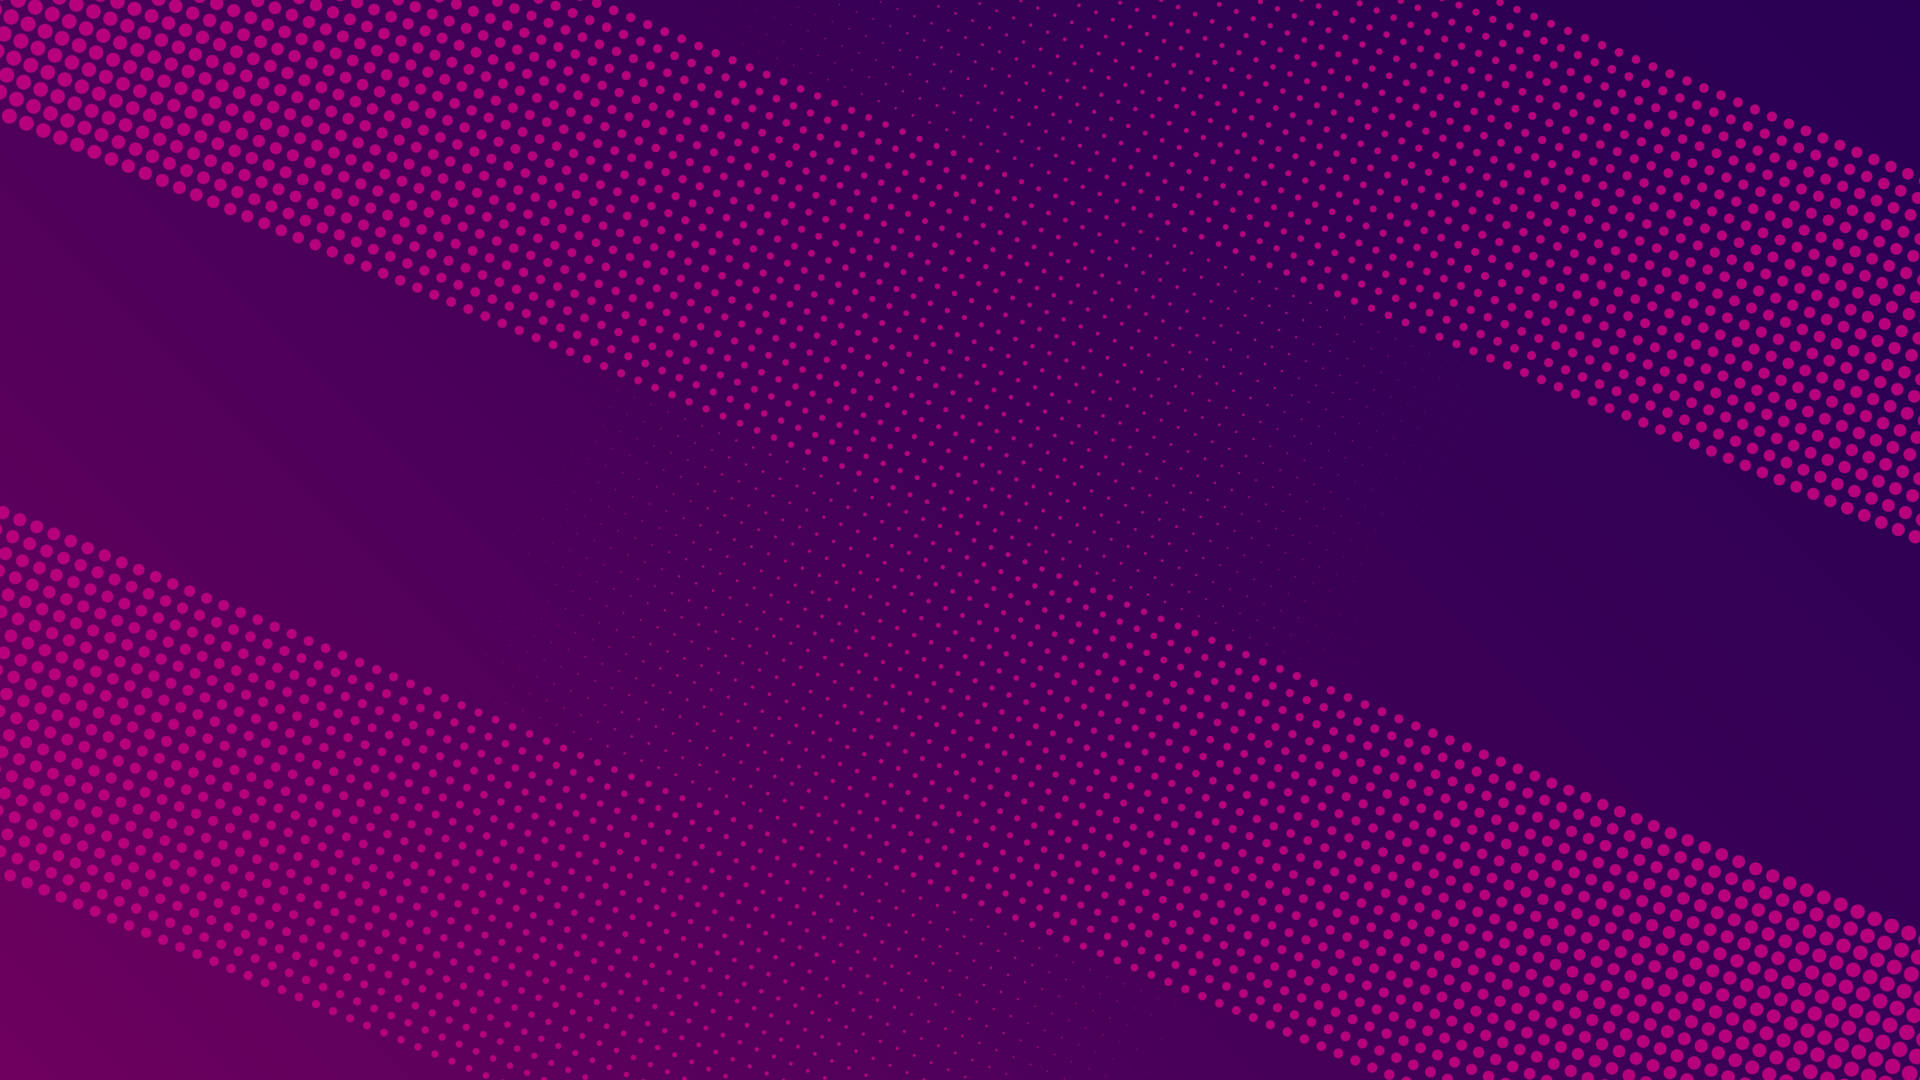 Abstract Lines With Dots 4k Purple Wallpaper